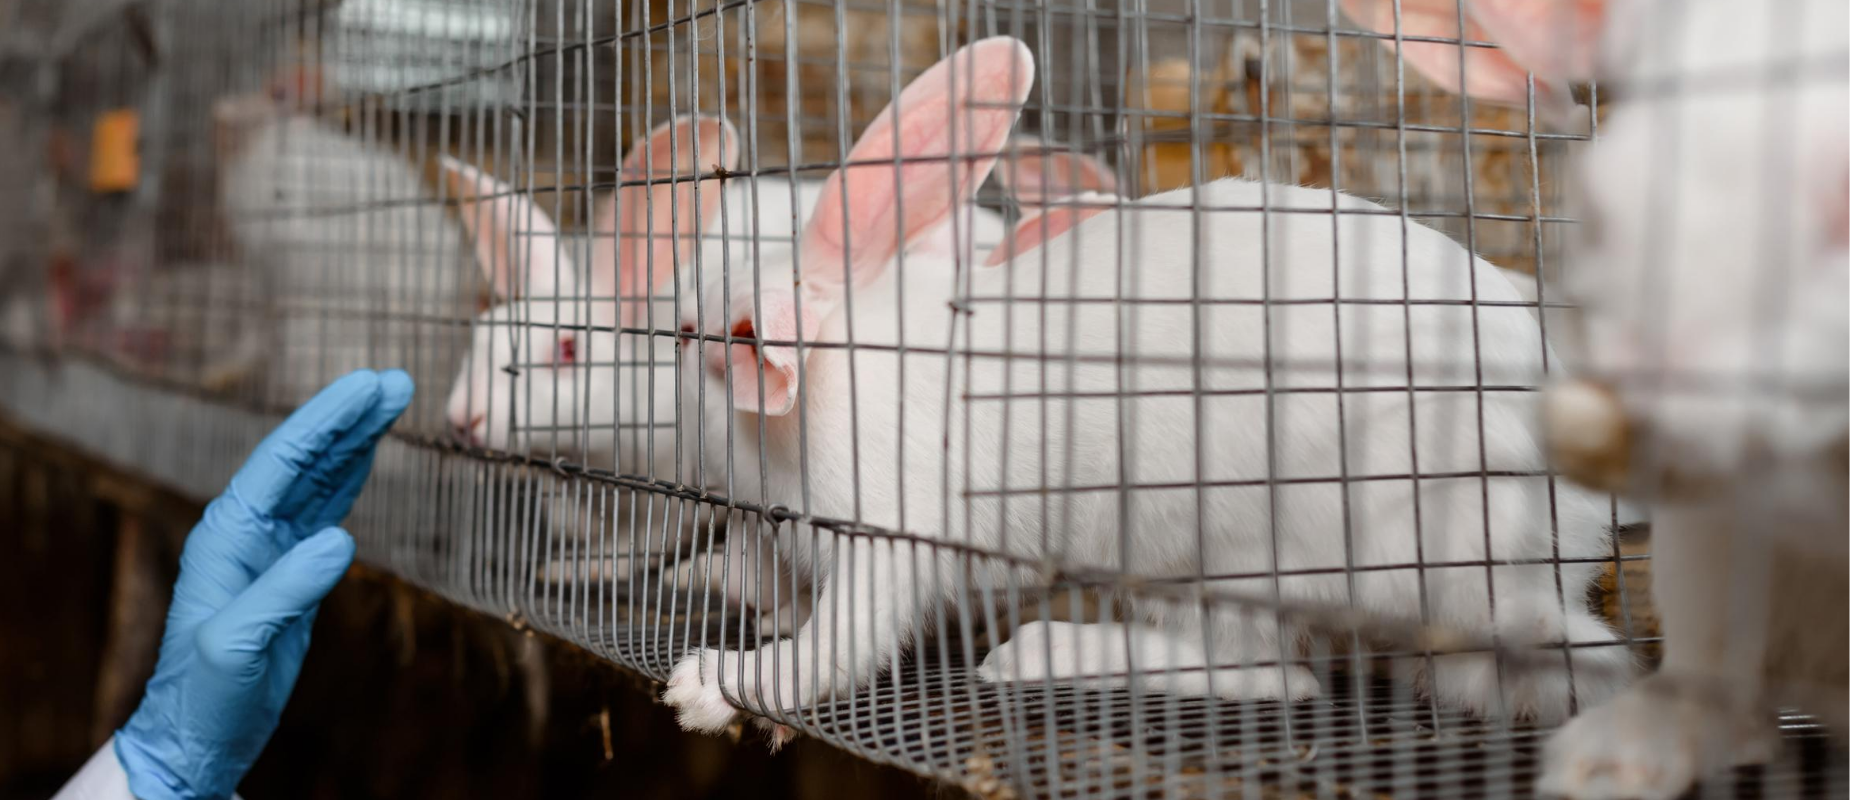 A human hand in blue medical gloves reached towards white rabbits held in cages